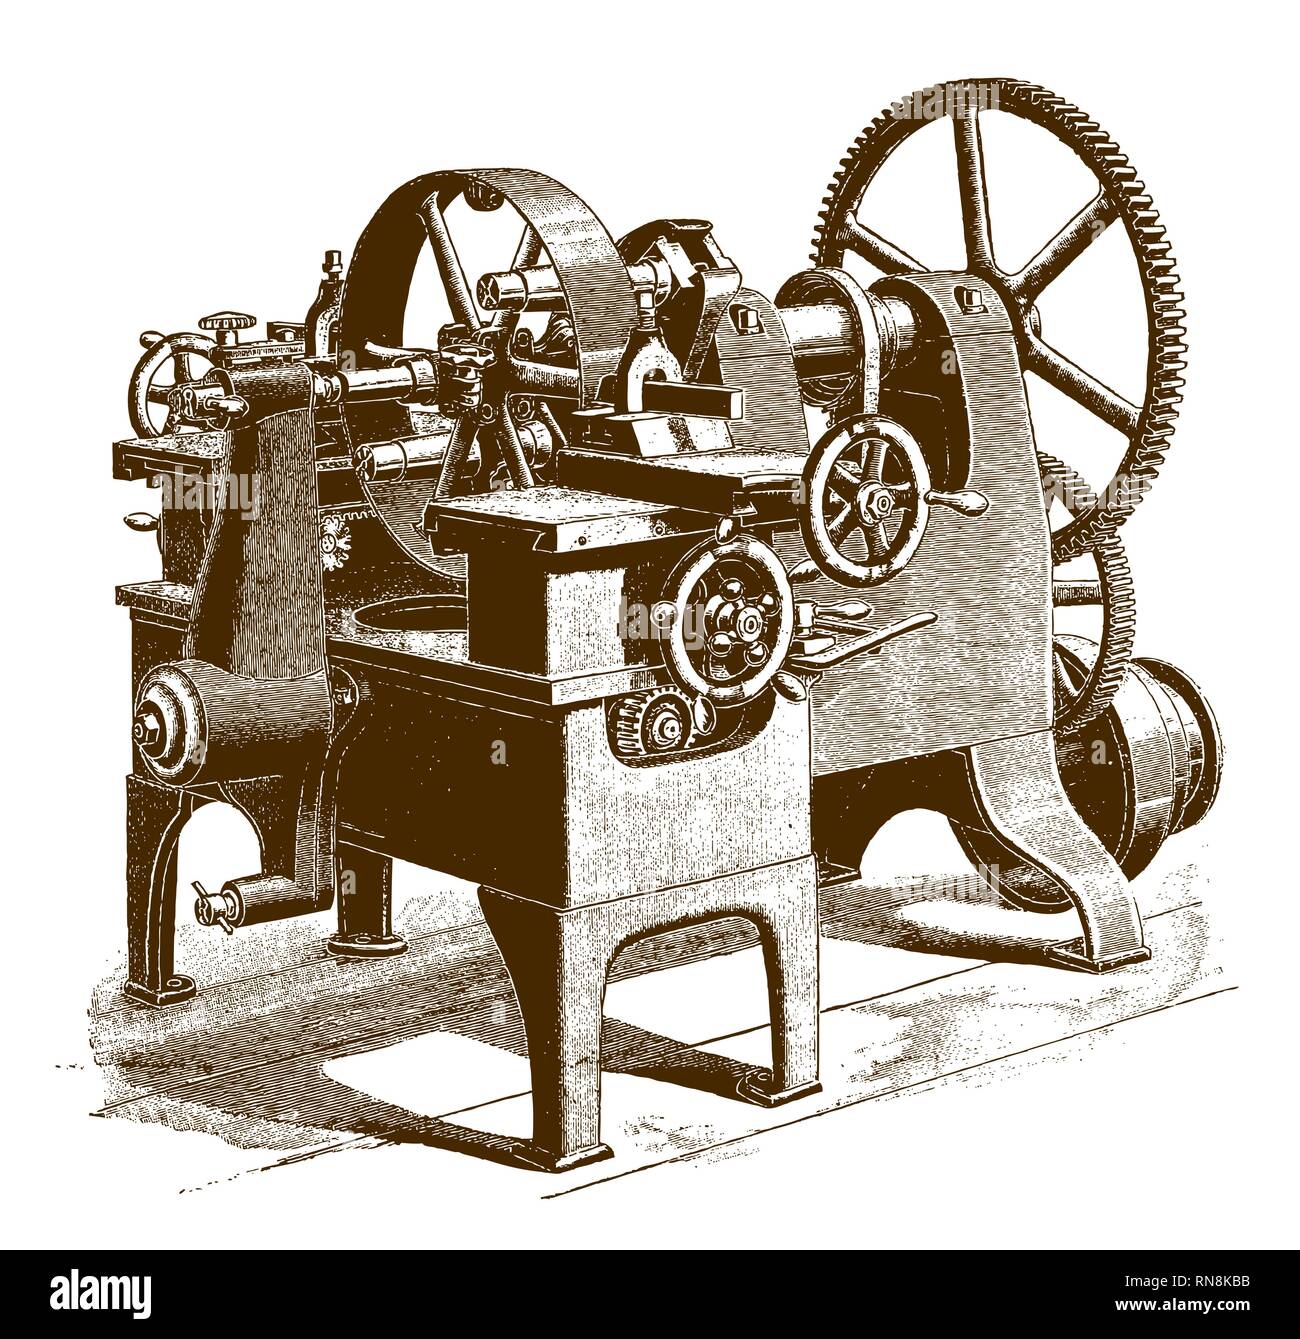 Historic pulley lathe machine (after an etching or engraving from the 19th century) Stock Vector